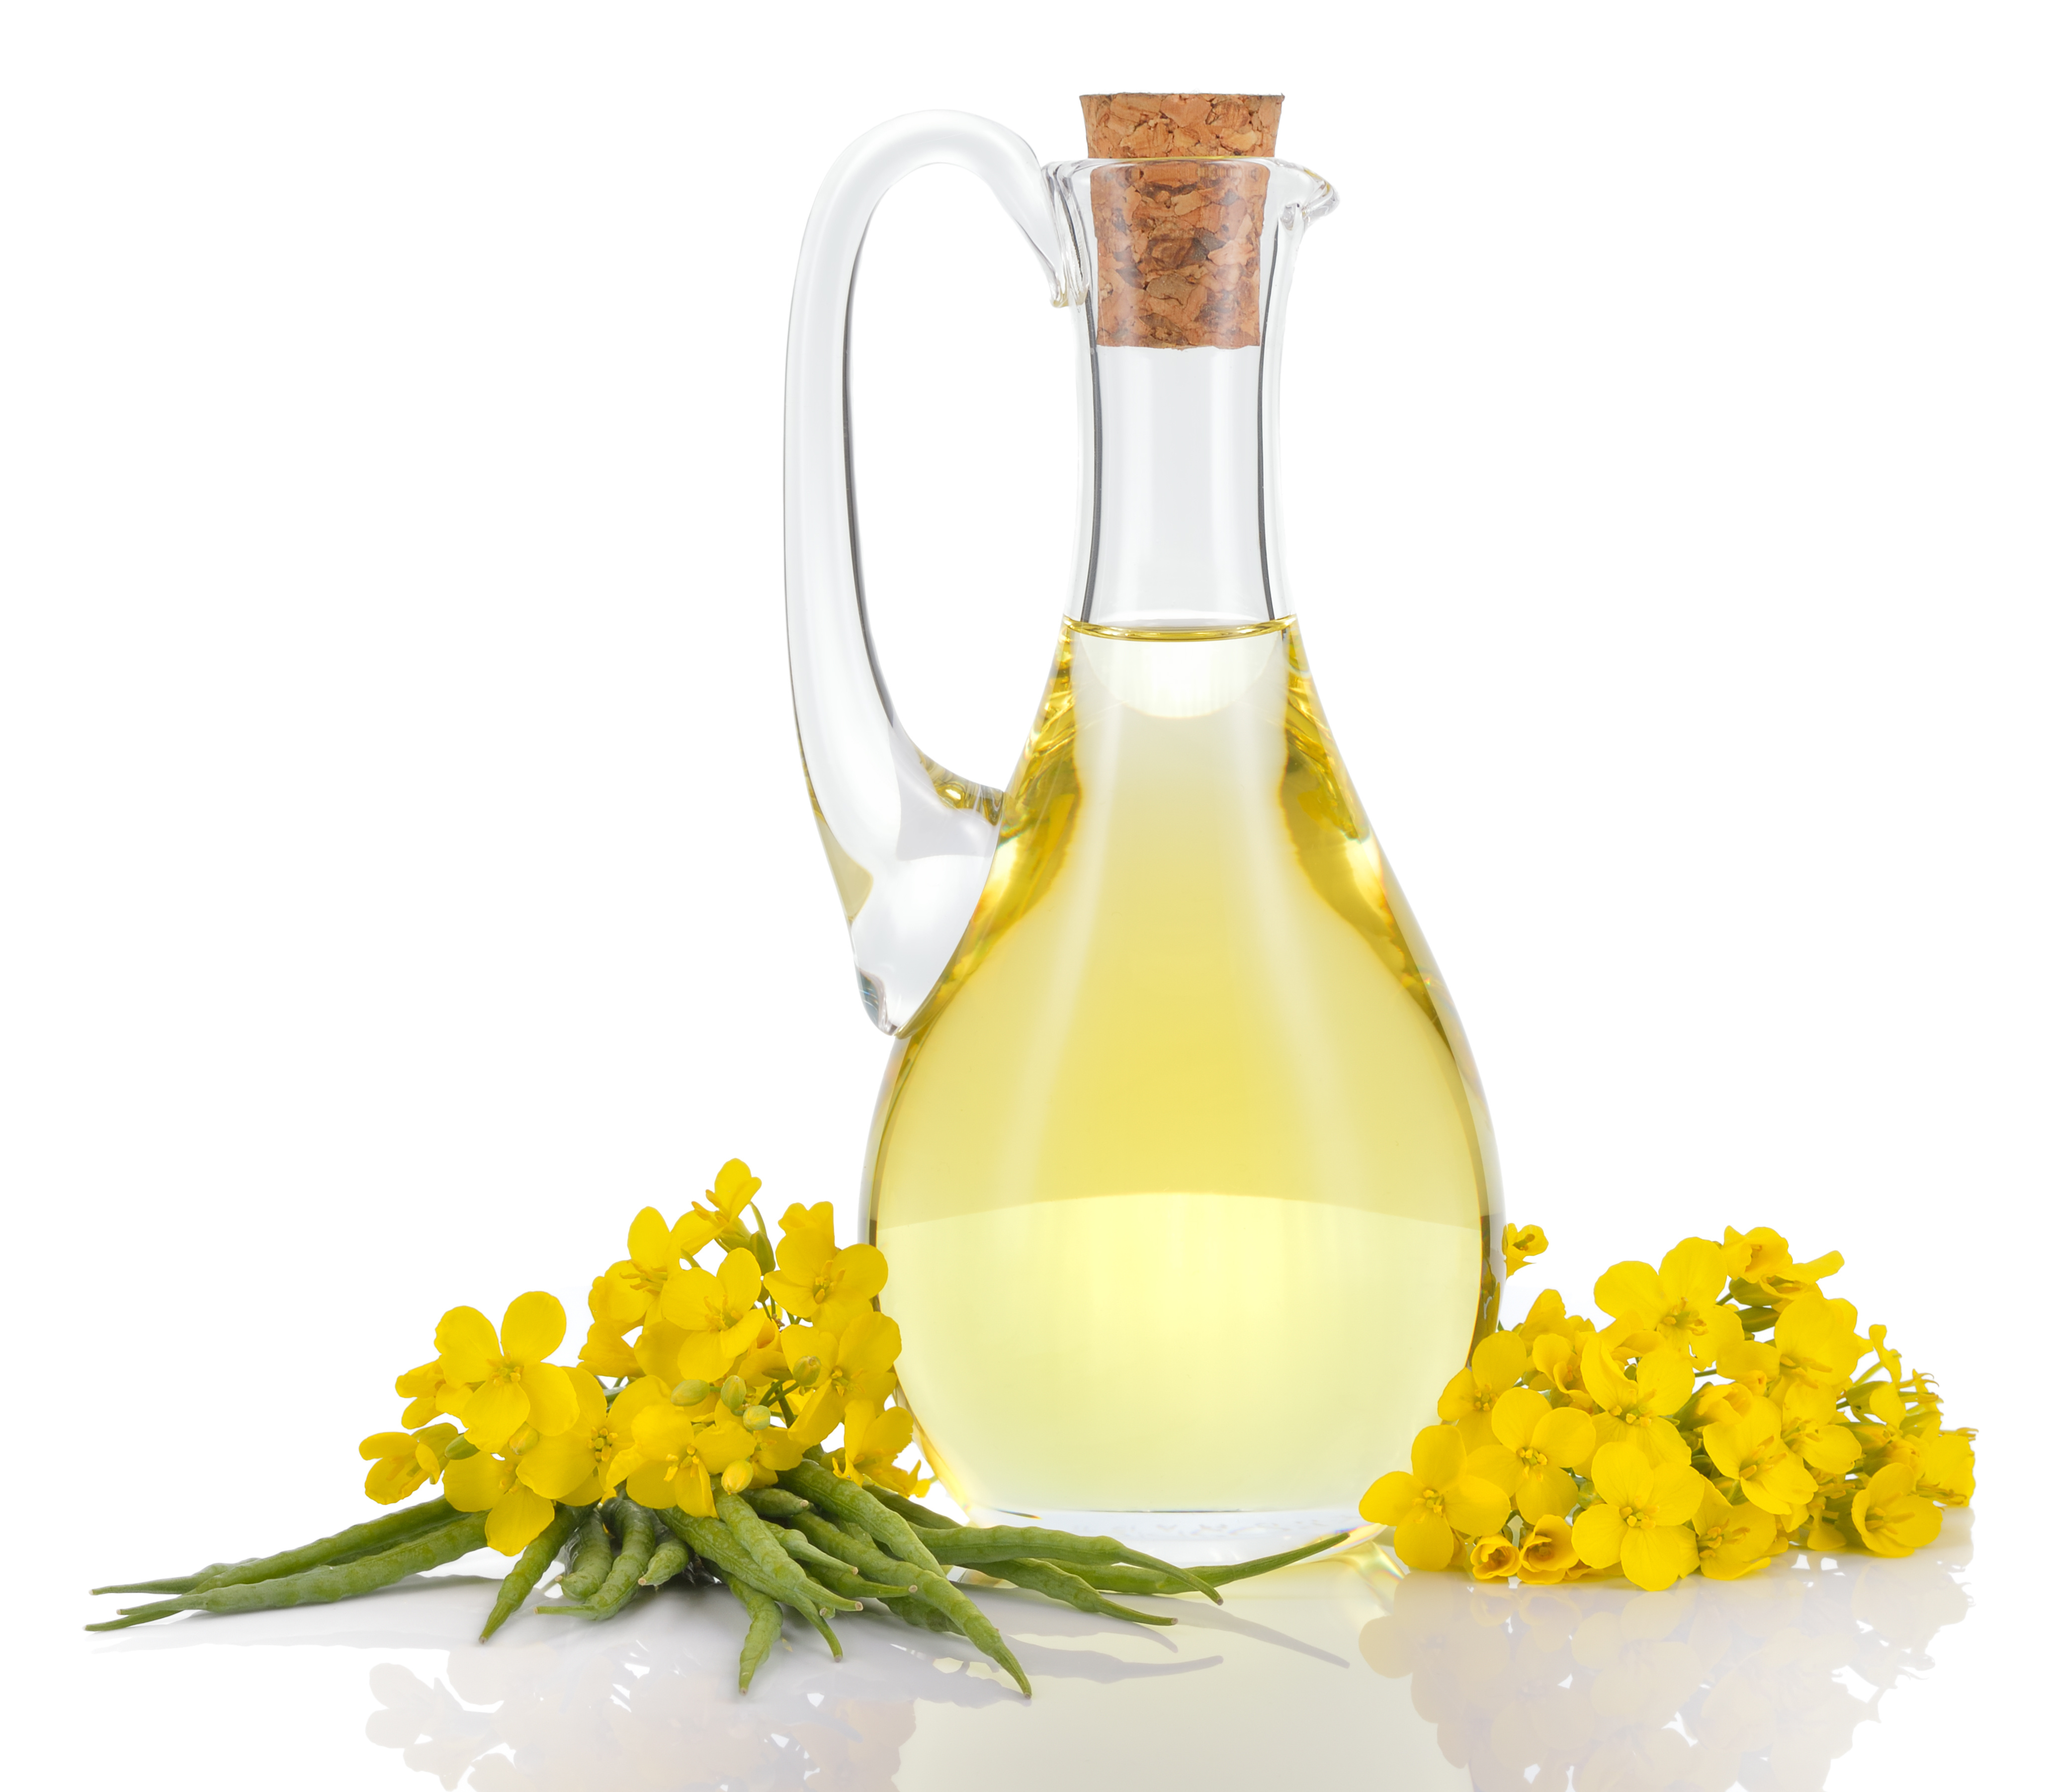 Rapeseed oil and flowers isolated over white.